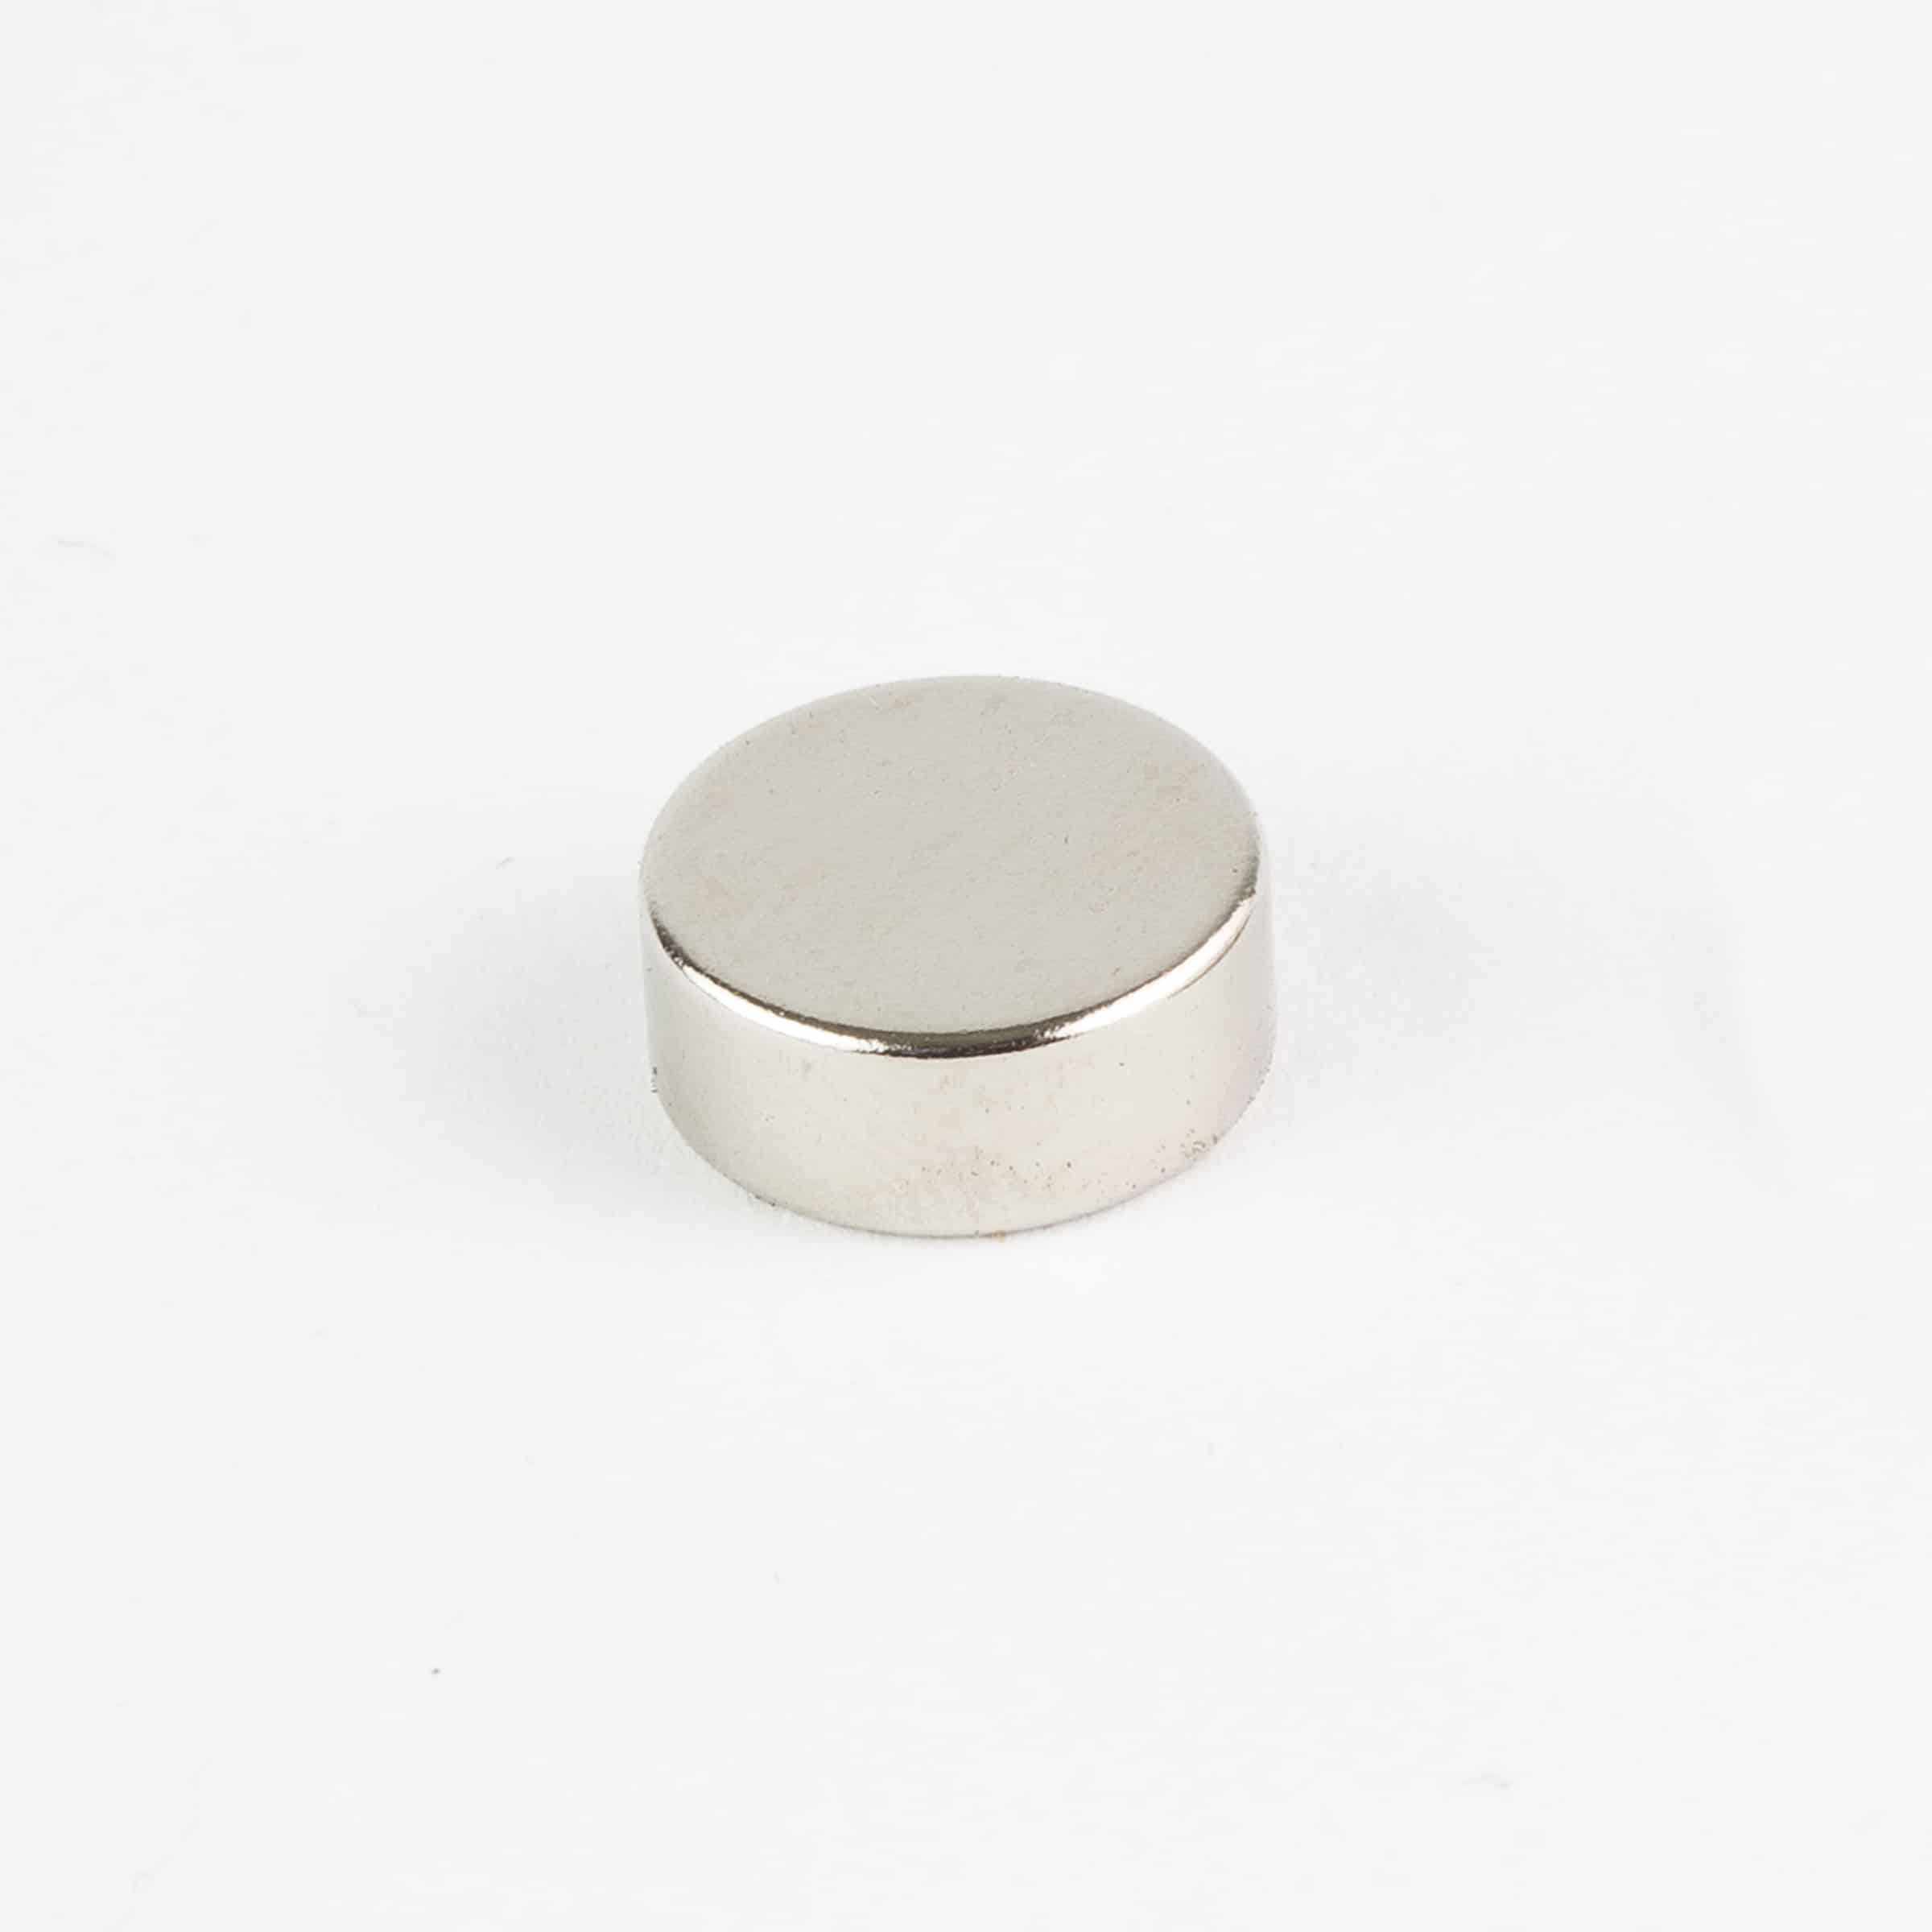 Small & Large Round Disc VARIETY of Neodymium Magnets 2mm Thick MEGA STRONG! 